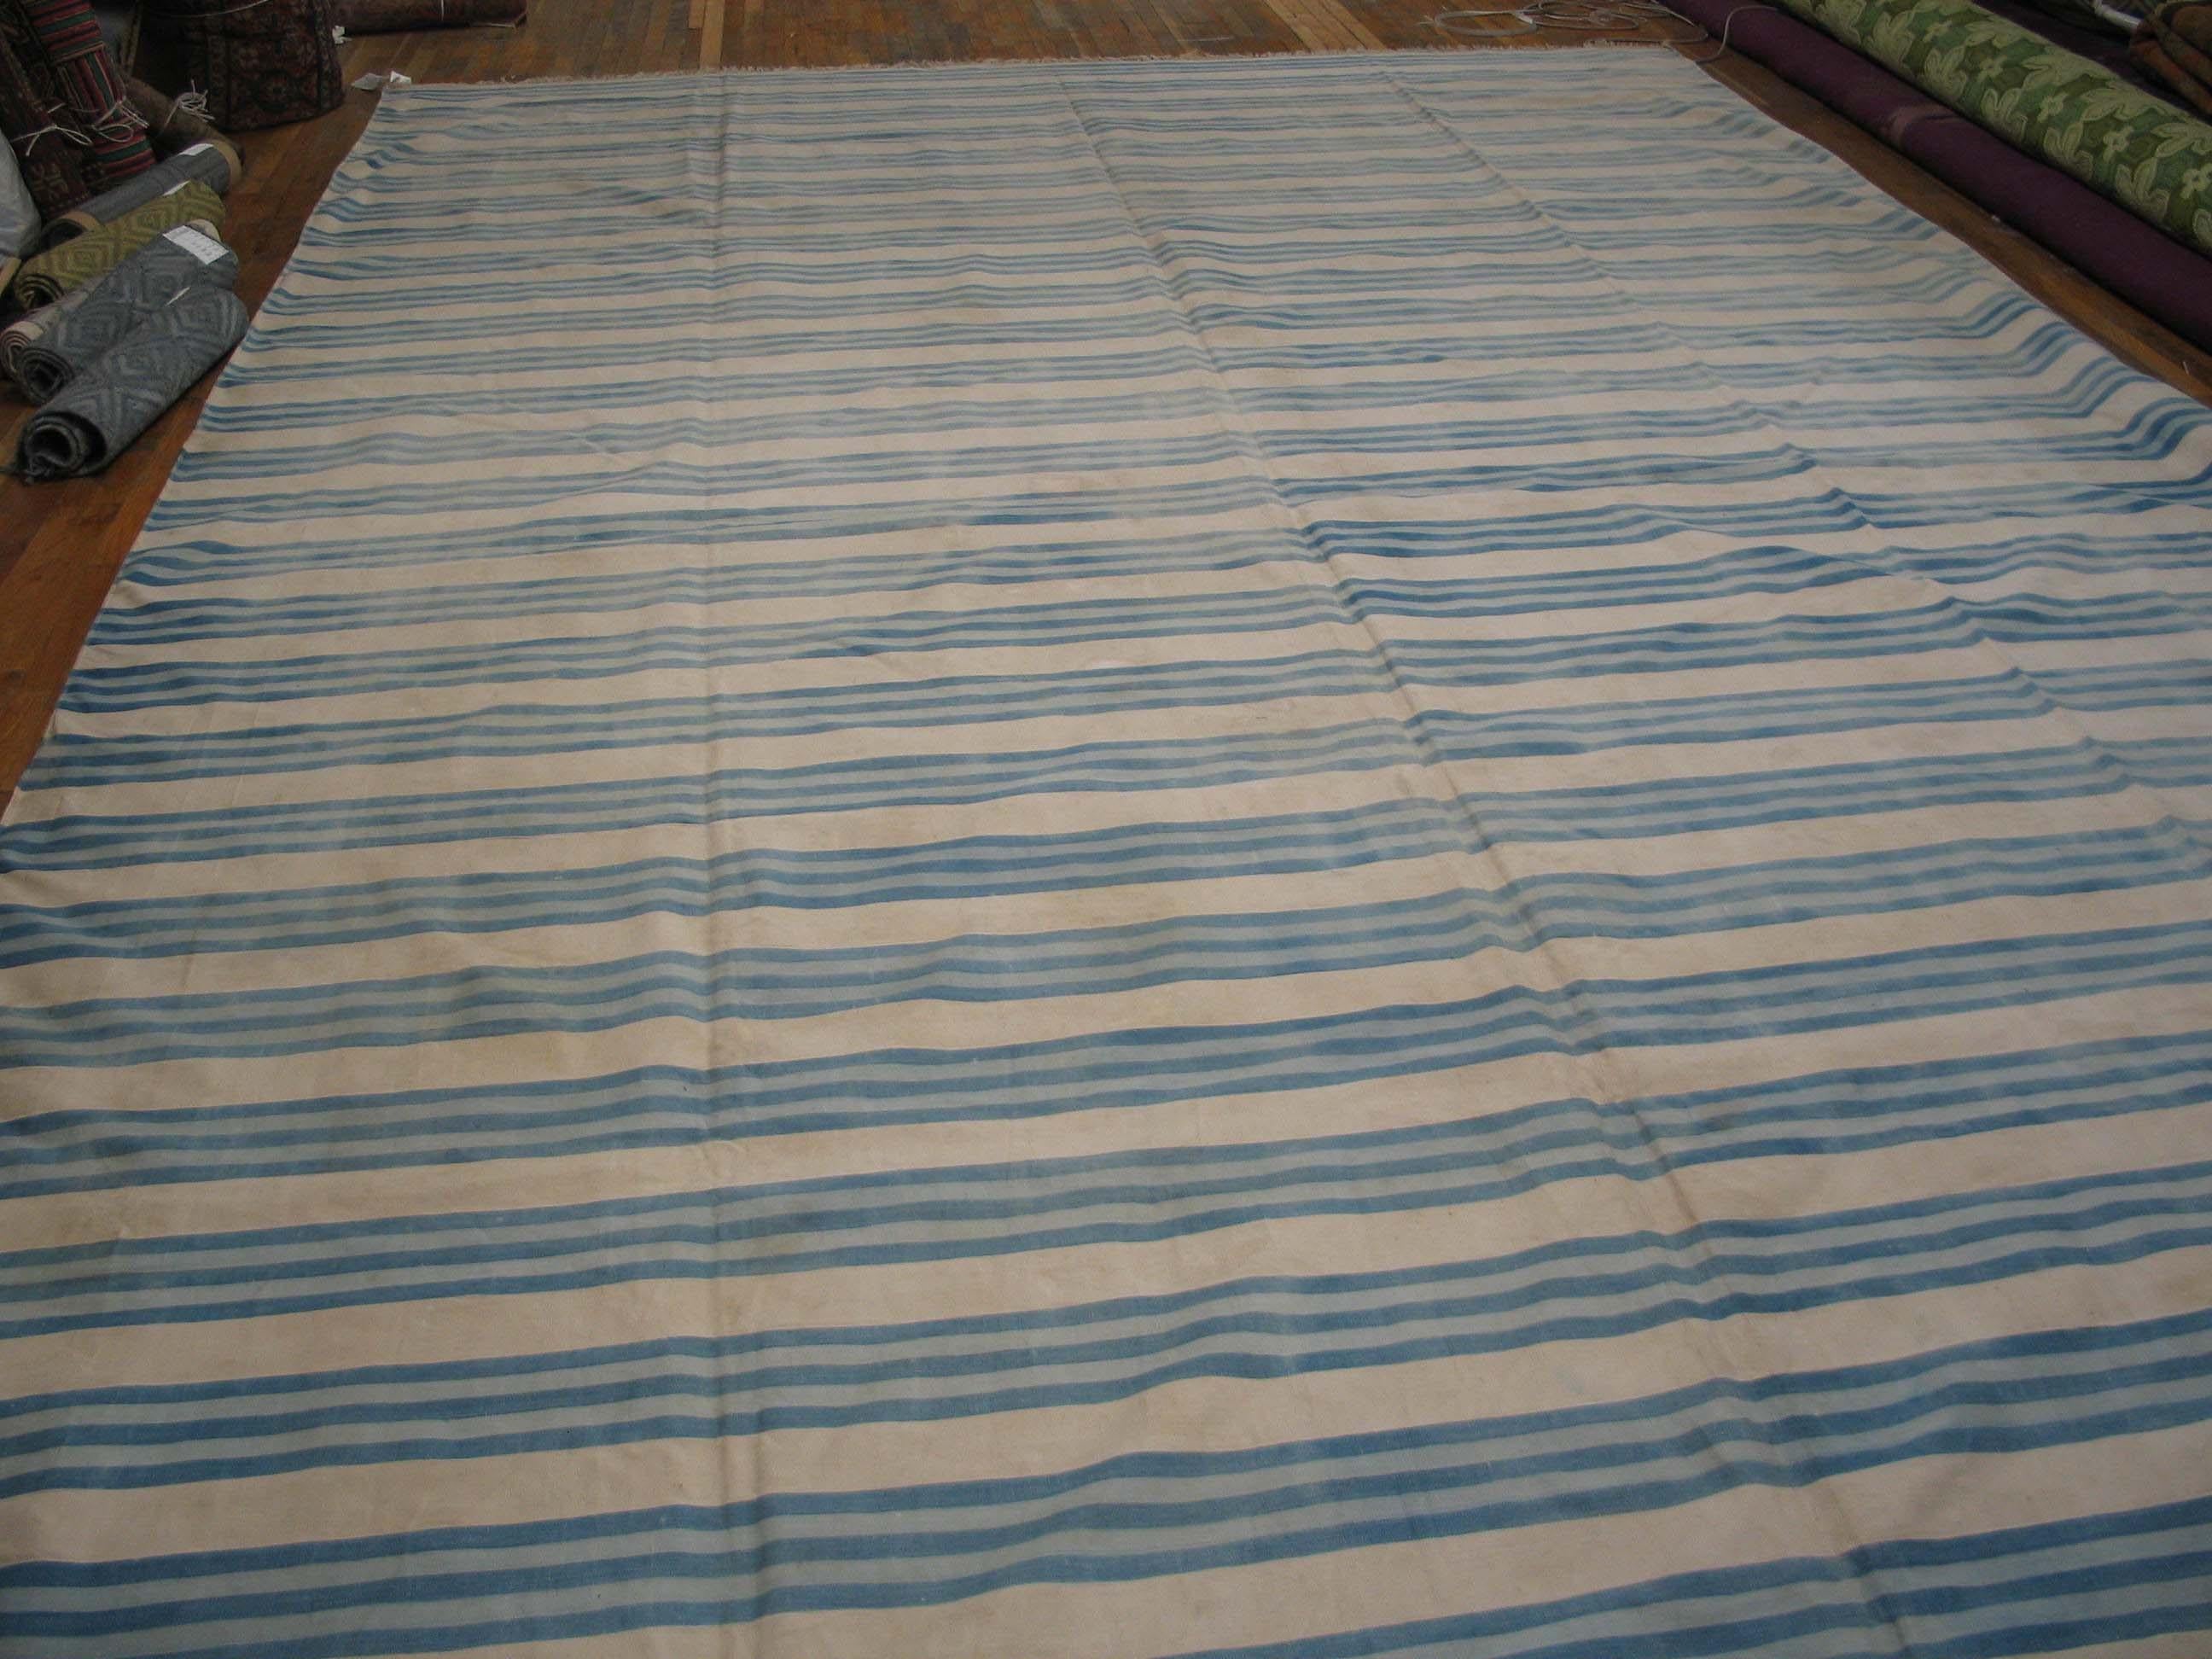 The overall pattern of triple light blue lines fades in and out, giving a hand washed character to this softly bitonal piece emphasizing the intermediate ecru stripes. Almost infinitely size adjustable. Good condition. All cotton construction.